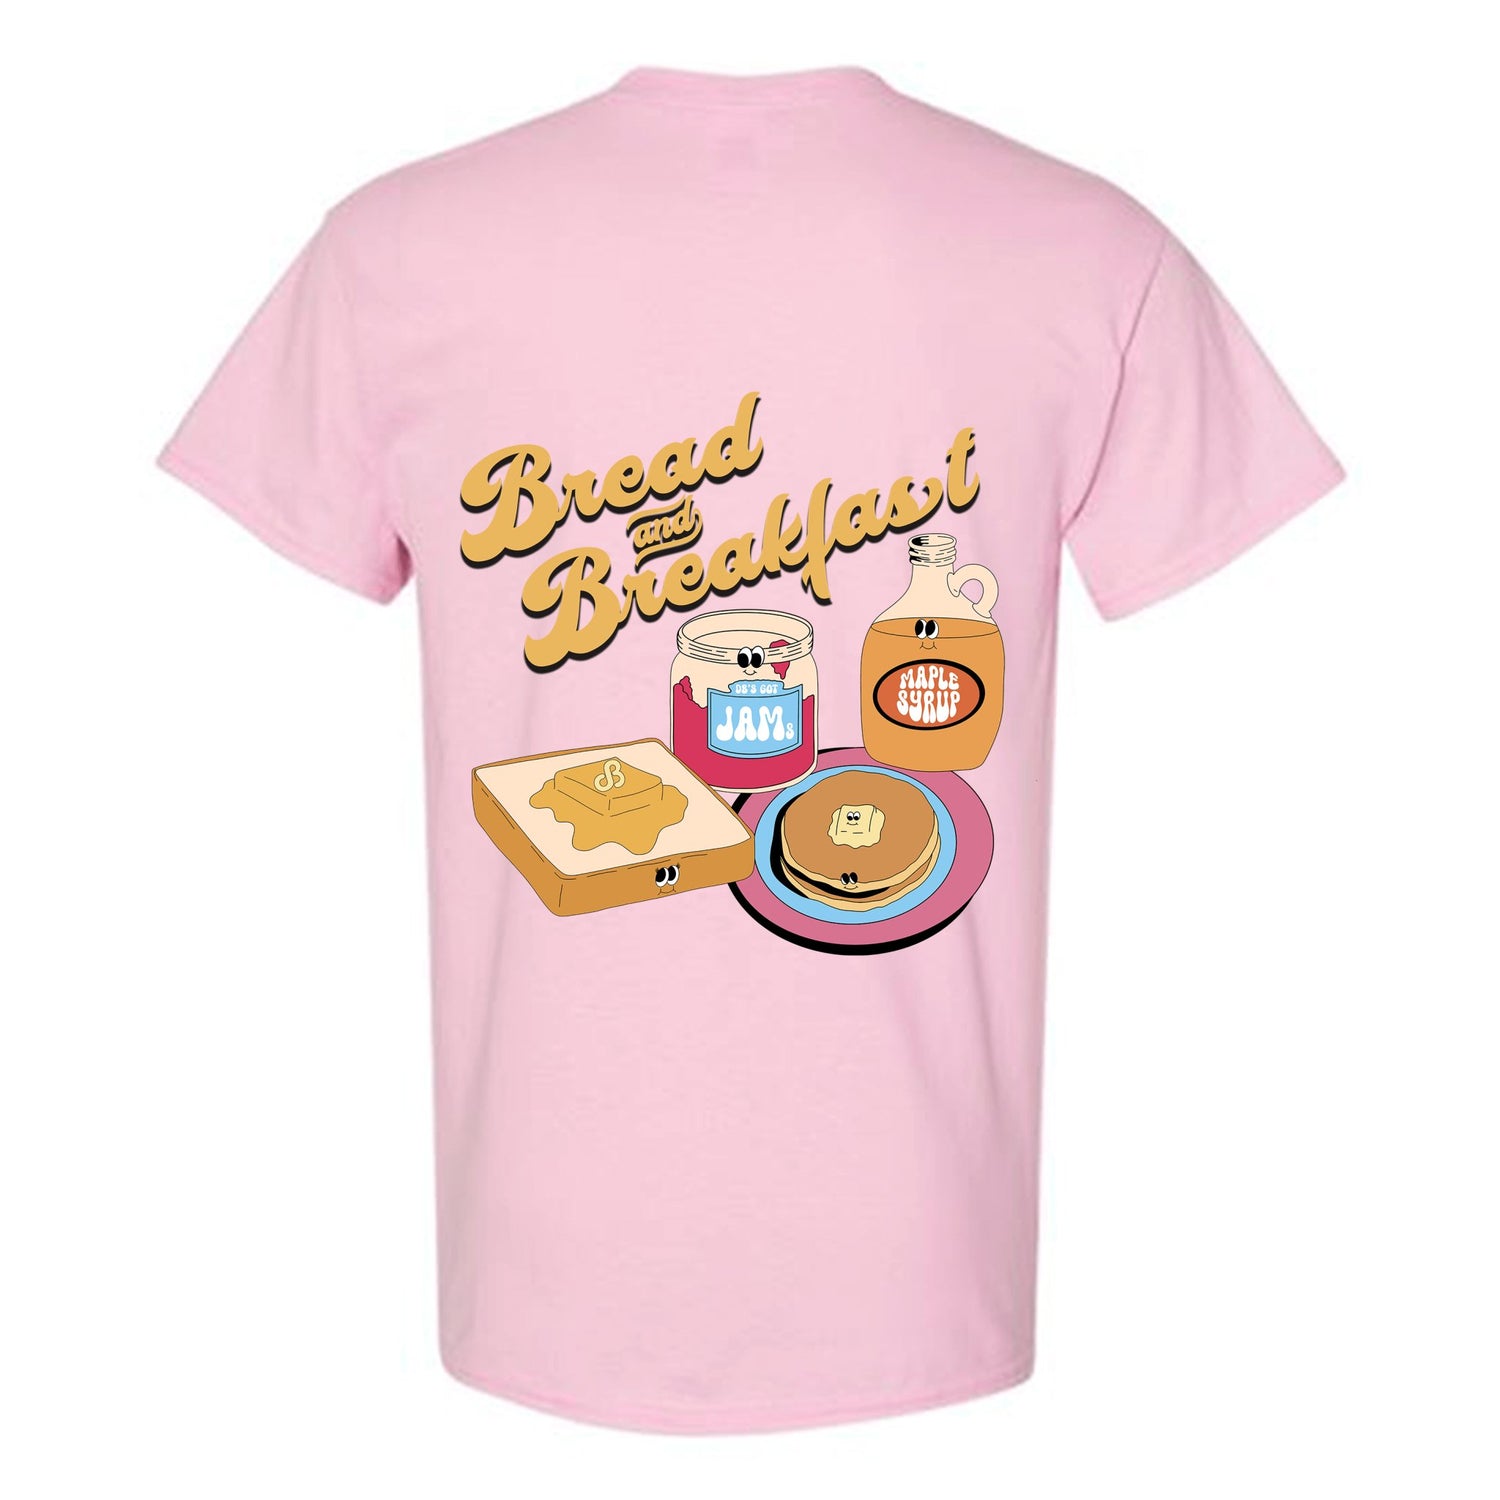 DAILY BREAD | Bread and Breakfast t-shirts